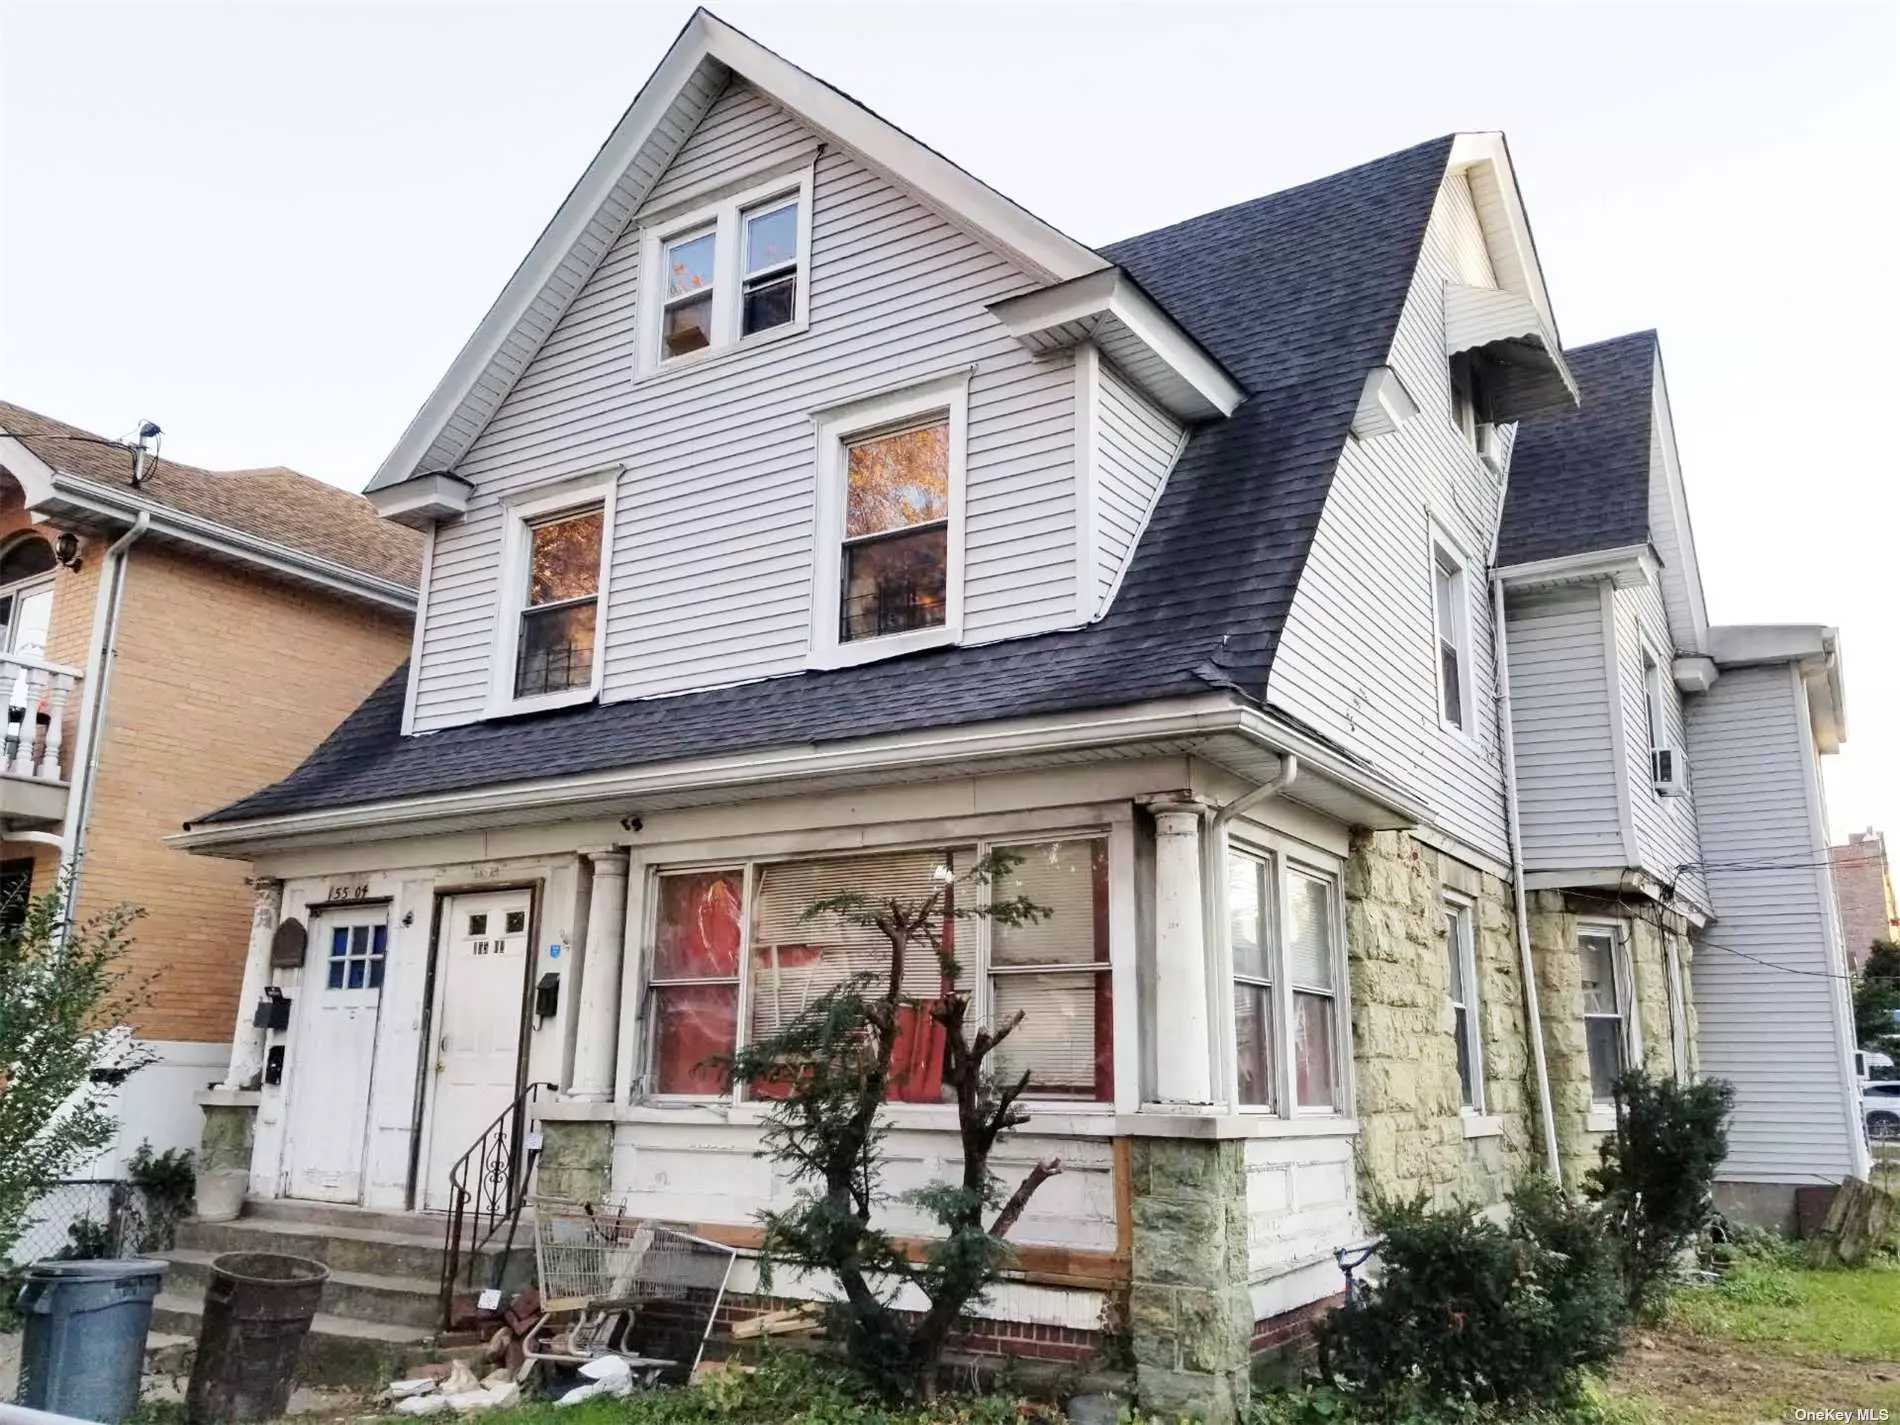 LOCATION! LOCATION! LOCATION! This 2Family house is located in Heart of Flushing. Lot Size 40X104.17,  Building Size 25X34, Gross Bldg Sq ft is 2, 577 Sf, Zoning is R3X. Excellent Neighborhood In Flushing. 2 Car Garage and Driveway, Near Schools Transportation+All.